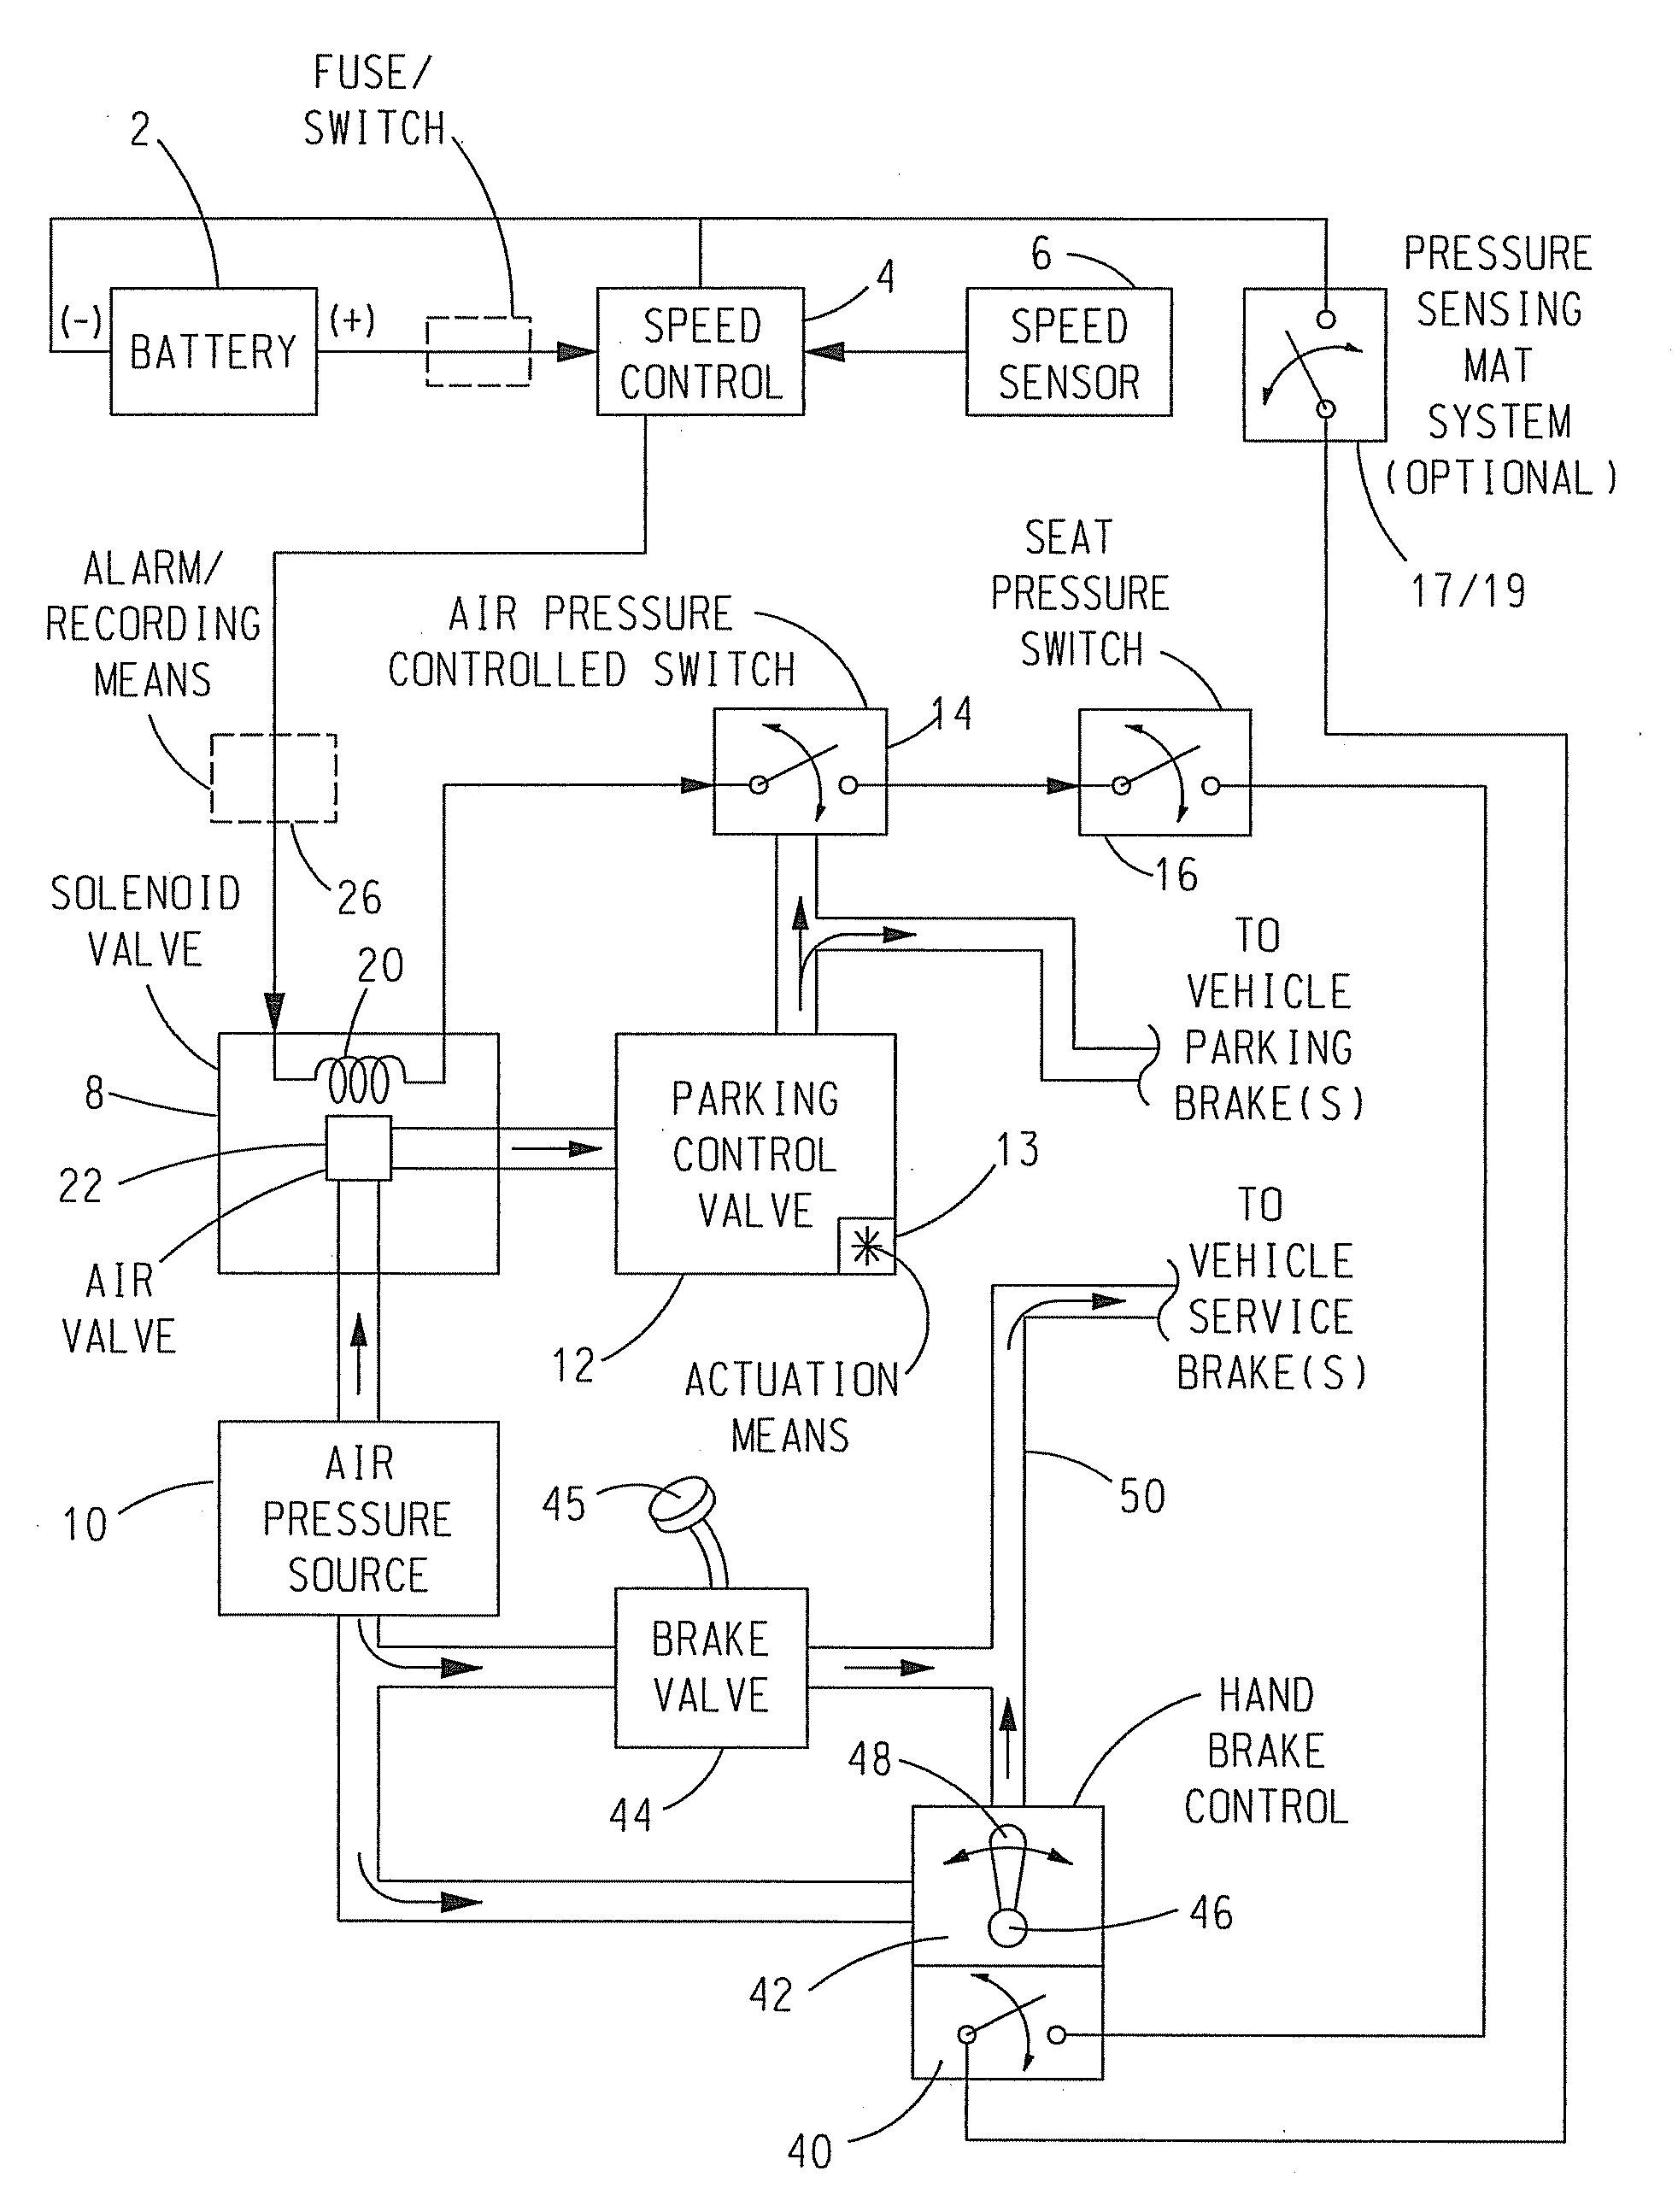 Anti-rollaway device for trucks and equipment with fluid and electrically actuated brakes